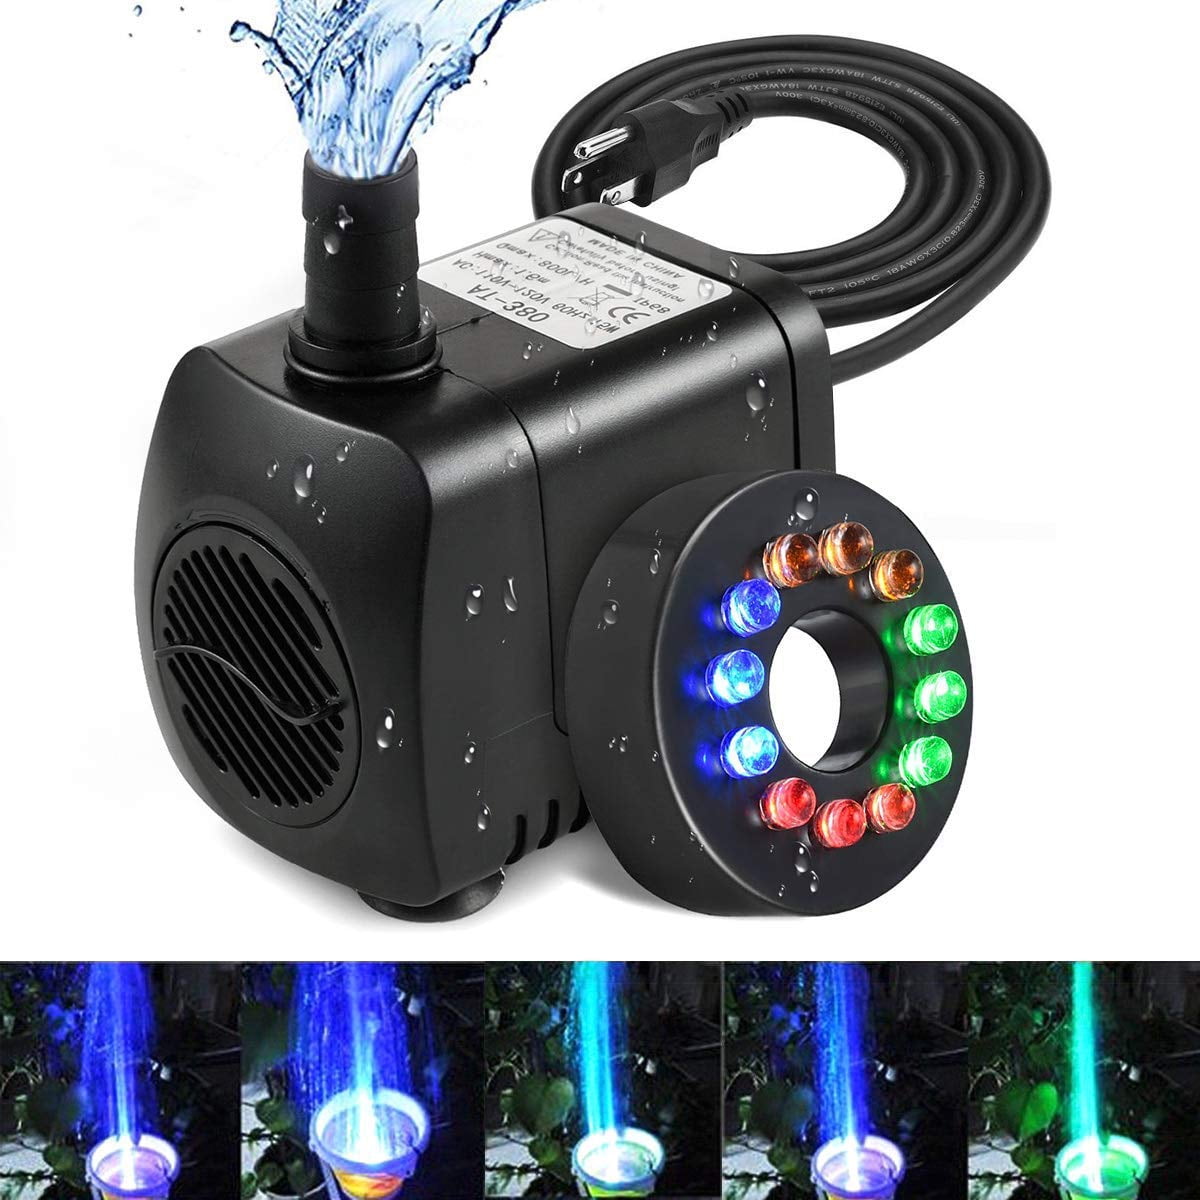 Submersible Pump Water 12 LED Feature Pond Aquarium Tank Sump Outdoor Fountain 